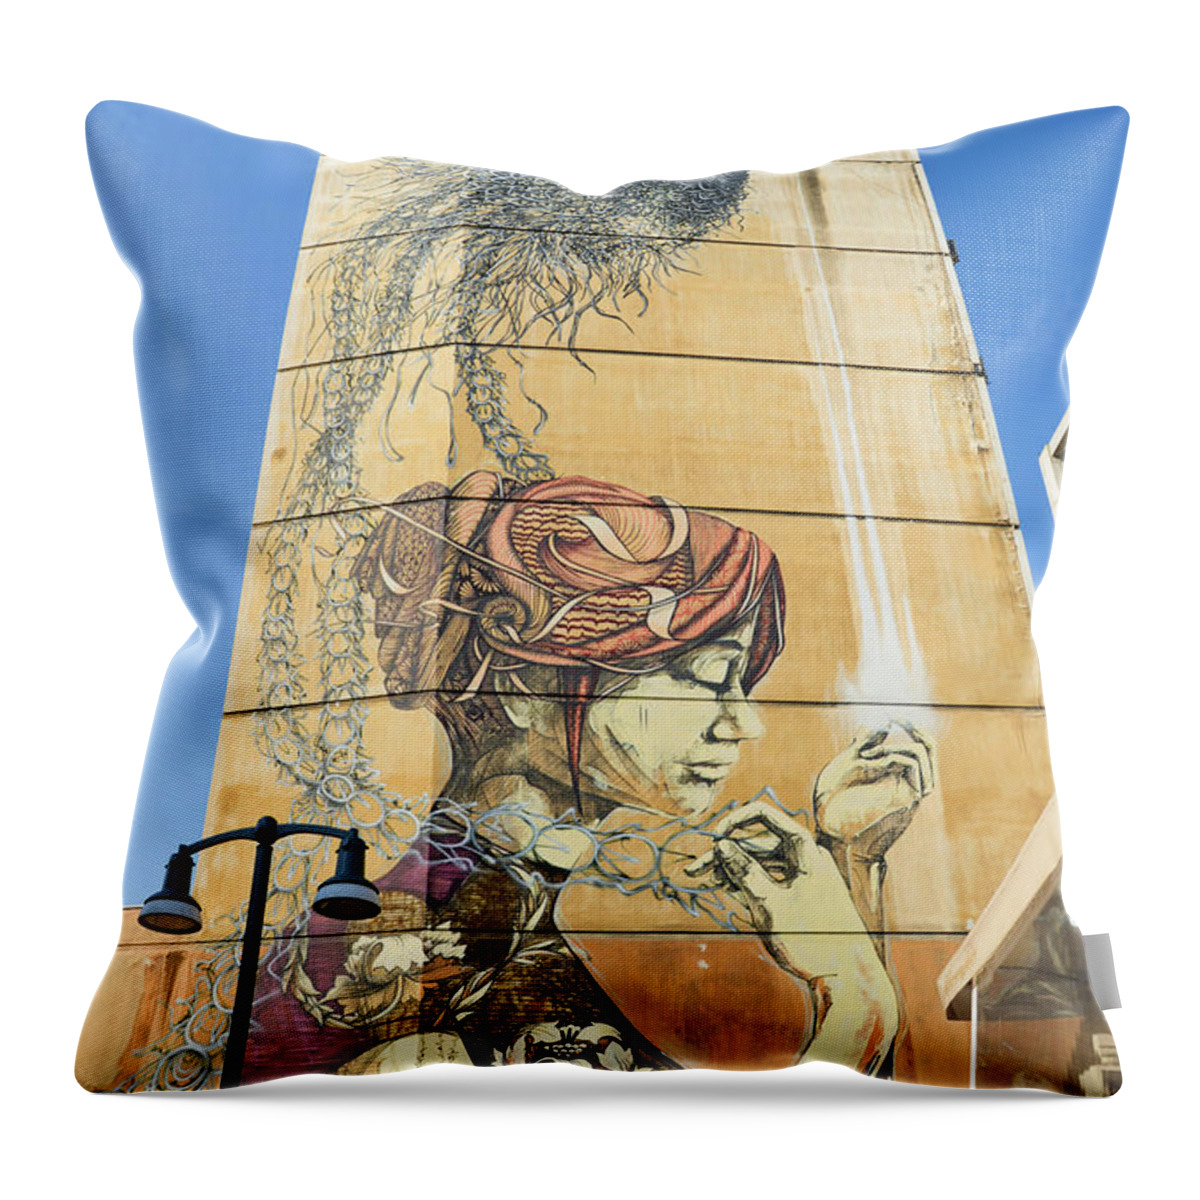 Graffiti Throw Pillow featuring the photograph In the realm of dreams by Yavor Mihaylov